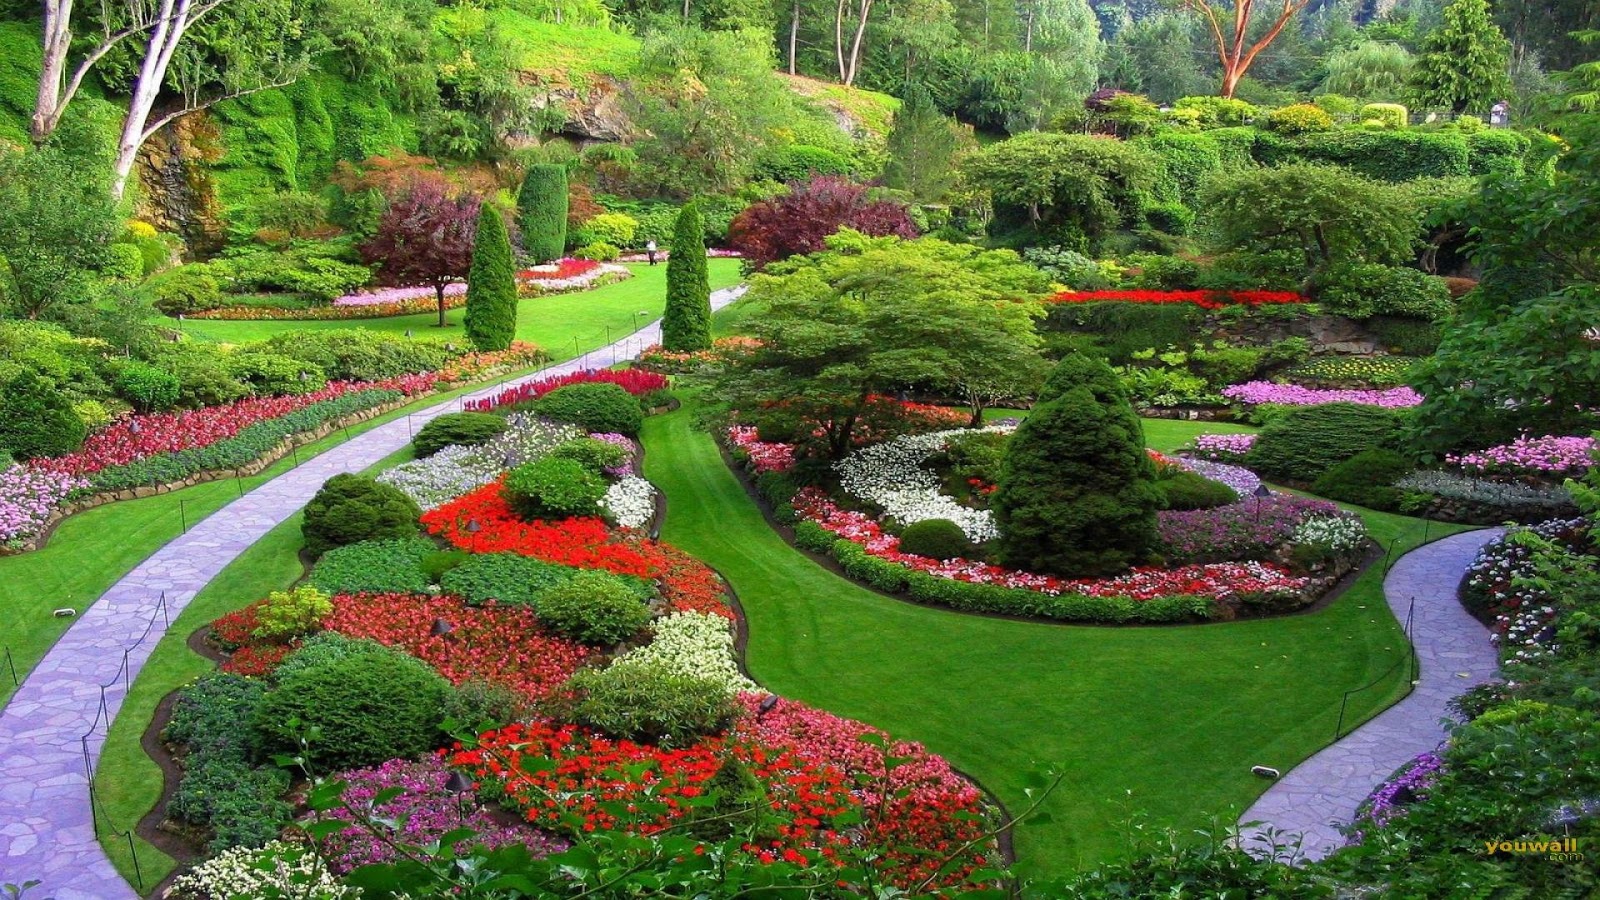 Gardens HD Wallpaper Check Out The Cool Image High